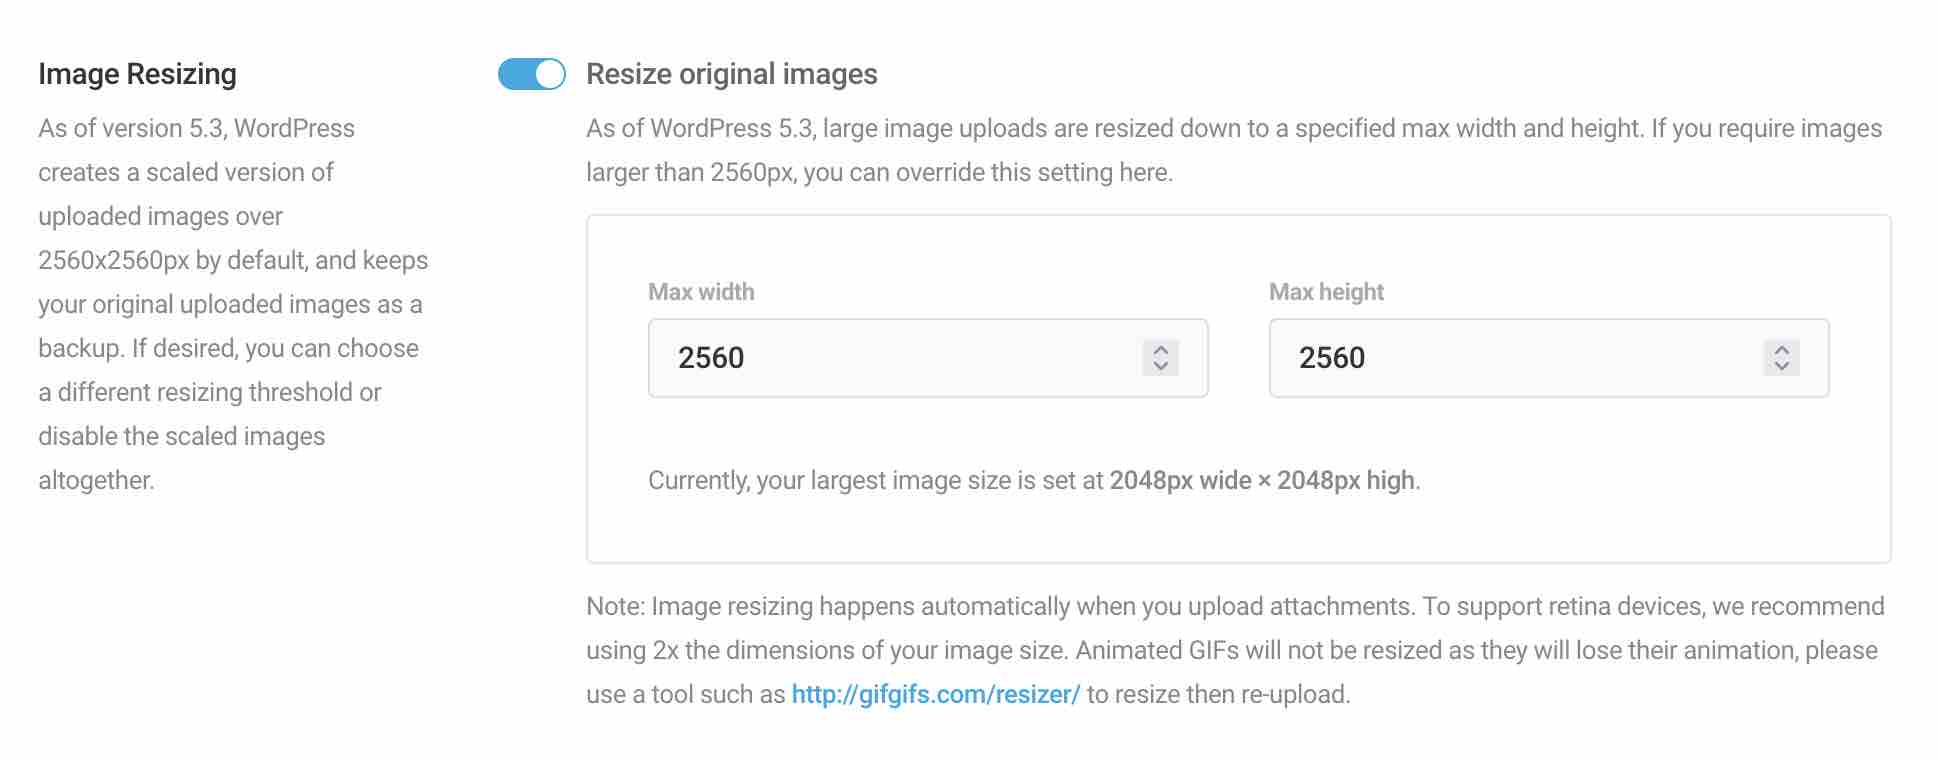 Smush allows you to resize your images.